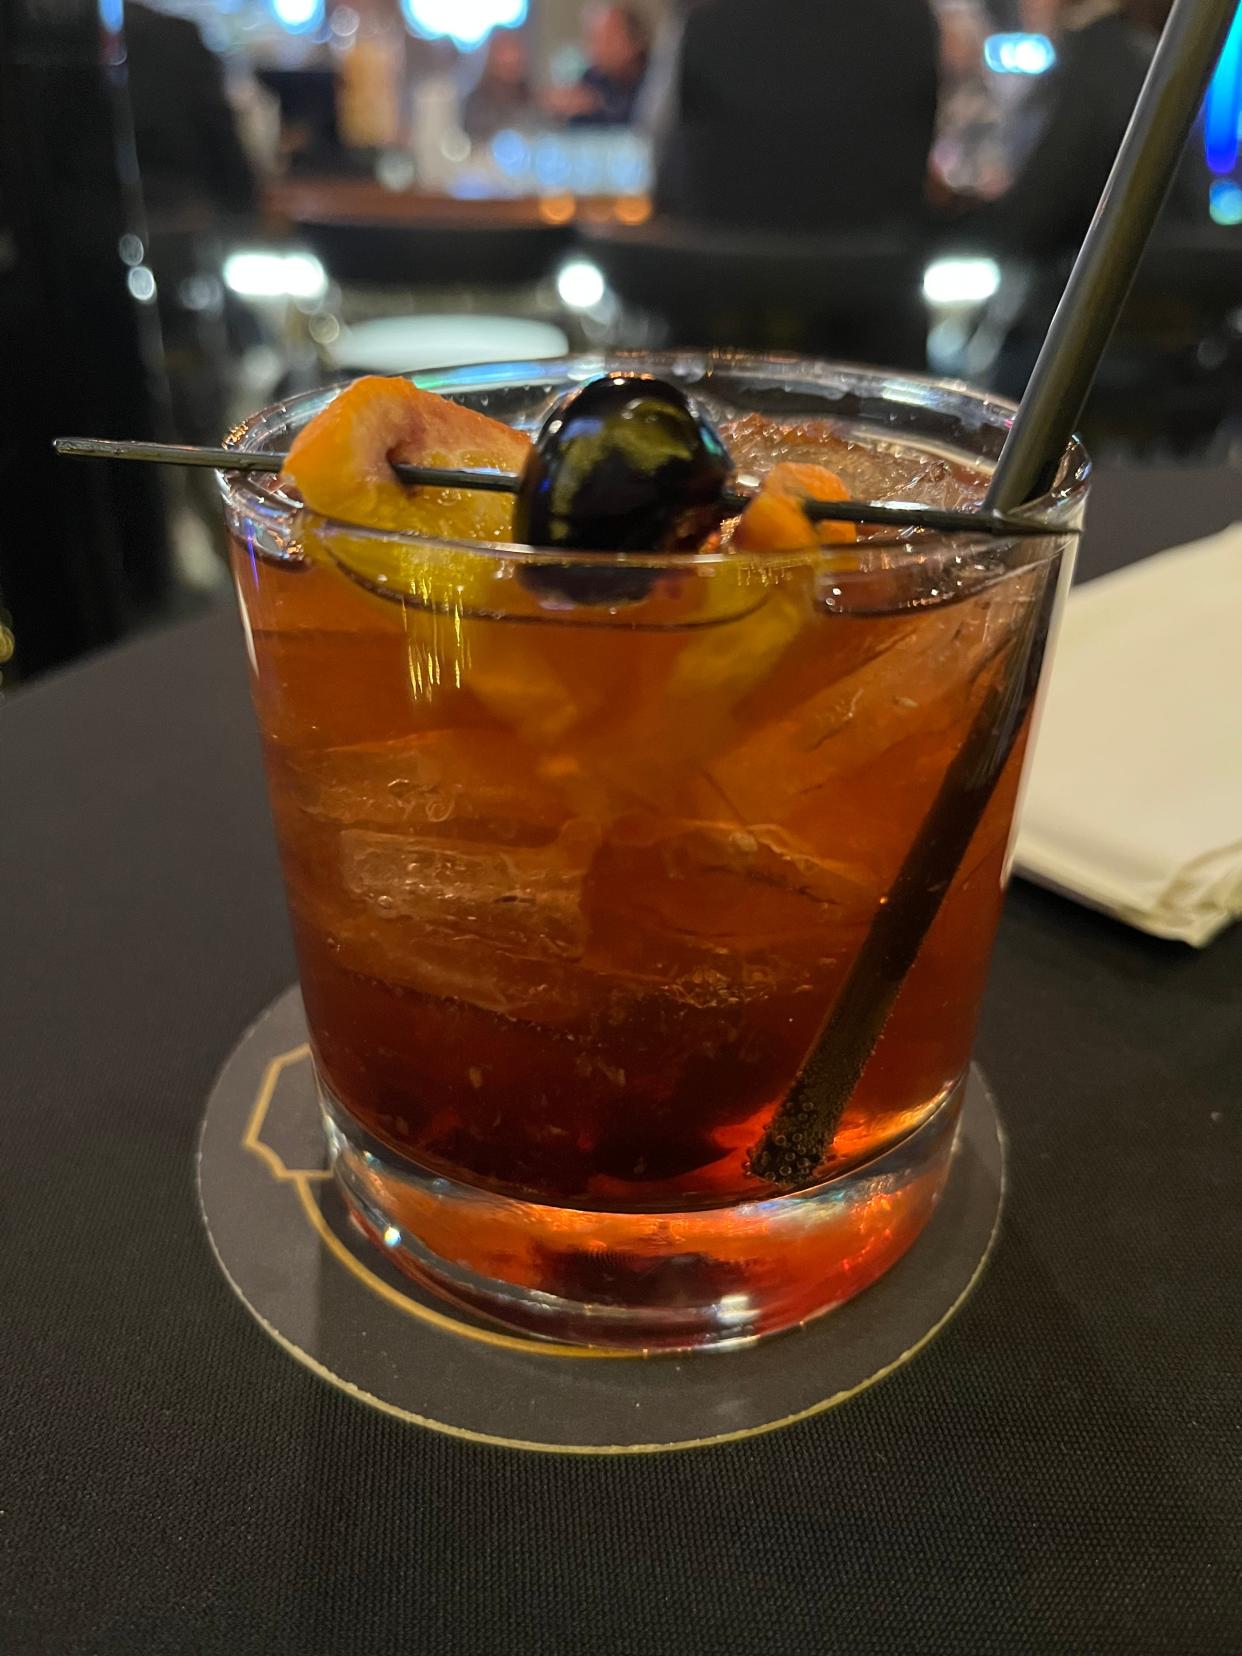 The stellar brandy old fashioned at C.C.'s Elbow Room, 2850 N. Brookfield Road, is made with Lustau brandy and Luxardo cherries.